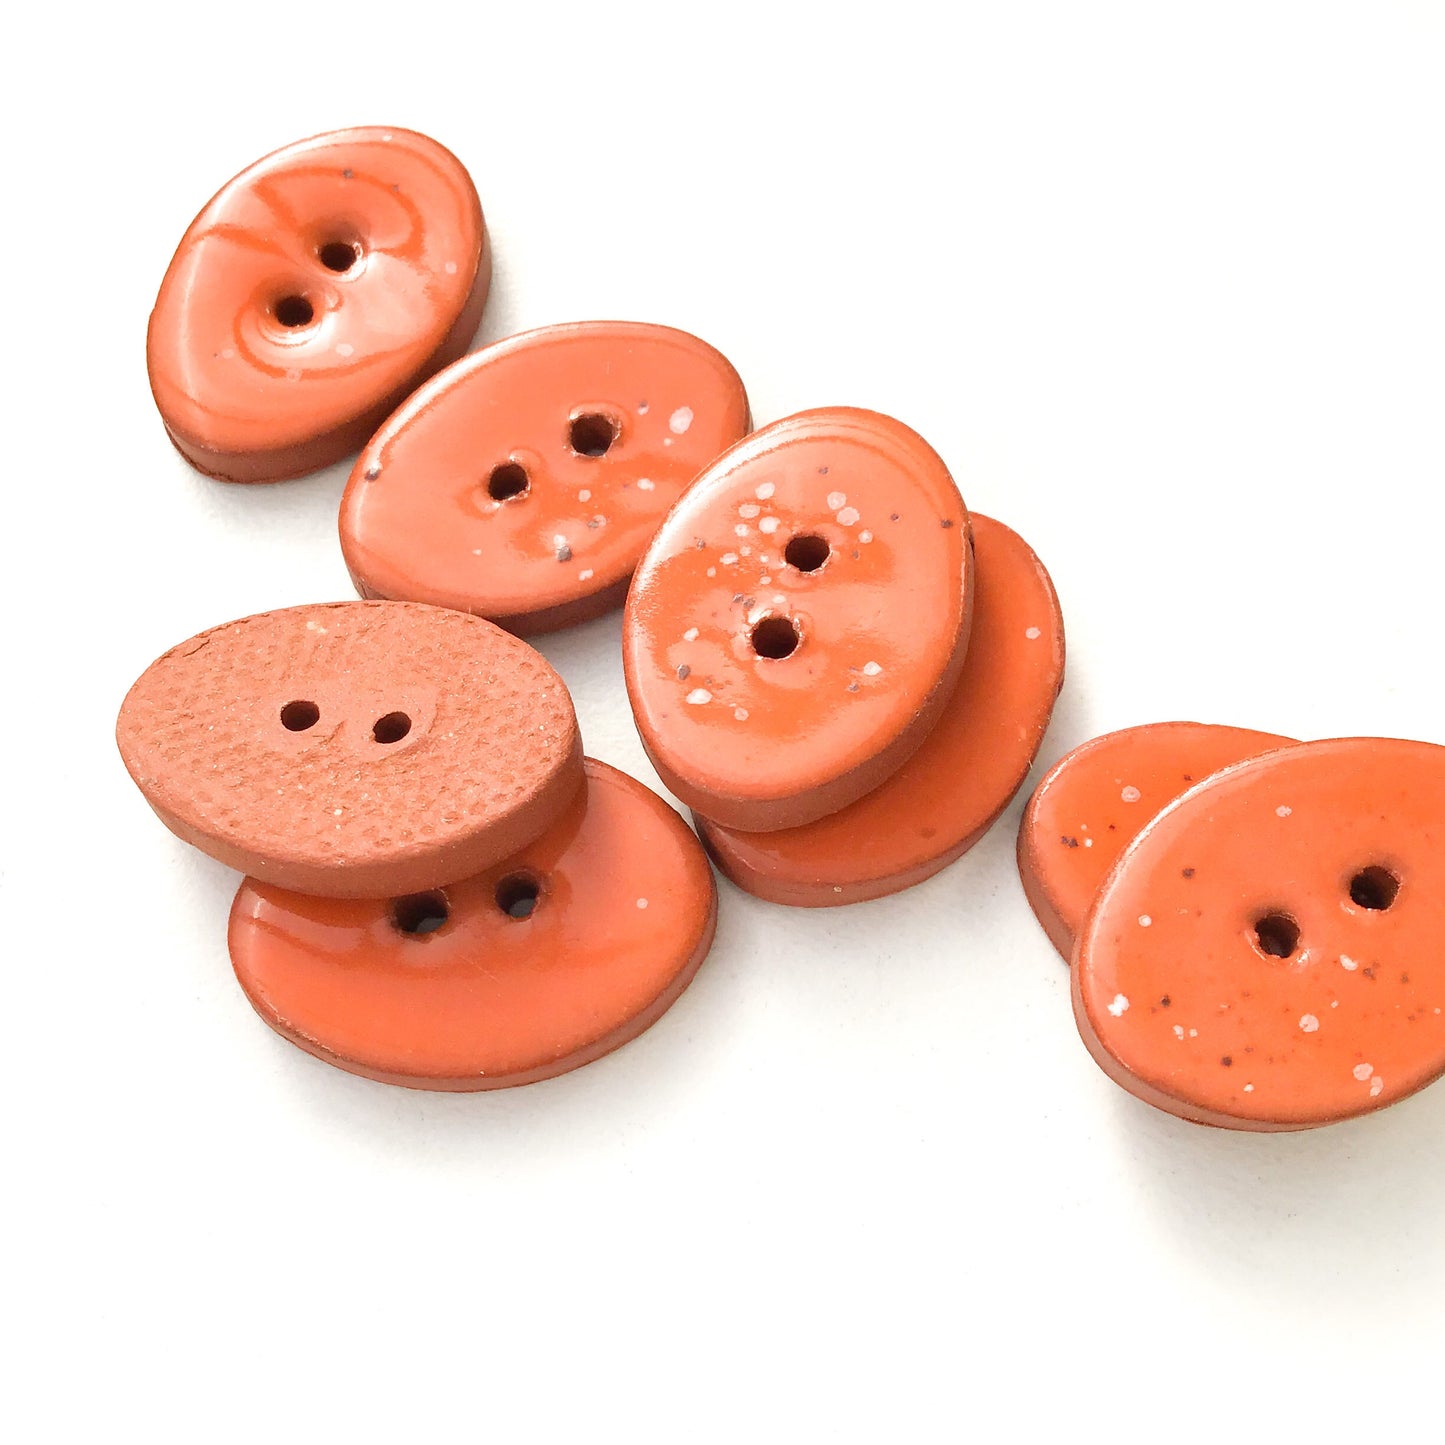 Speckled Orange Oval Clay Buttons - 5/8" x 7/8" - 8 Pack (ws-227)